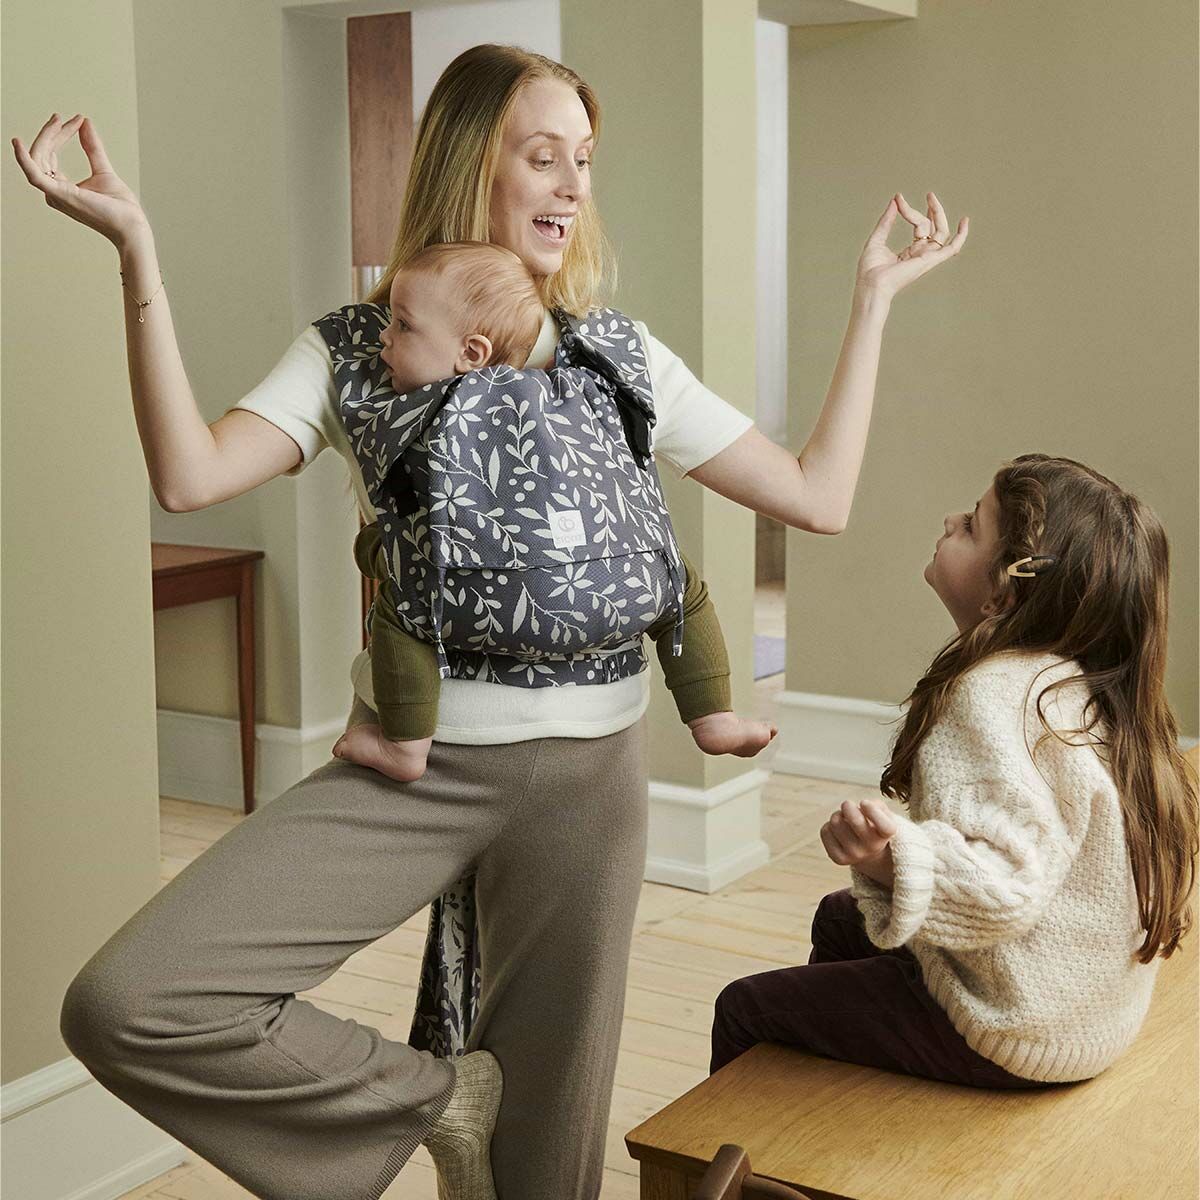 A woman standing in a living room carrying her baby in a Stokke Limas baby carrier whilst entertaining her young daughter who is sitting in front of her.